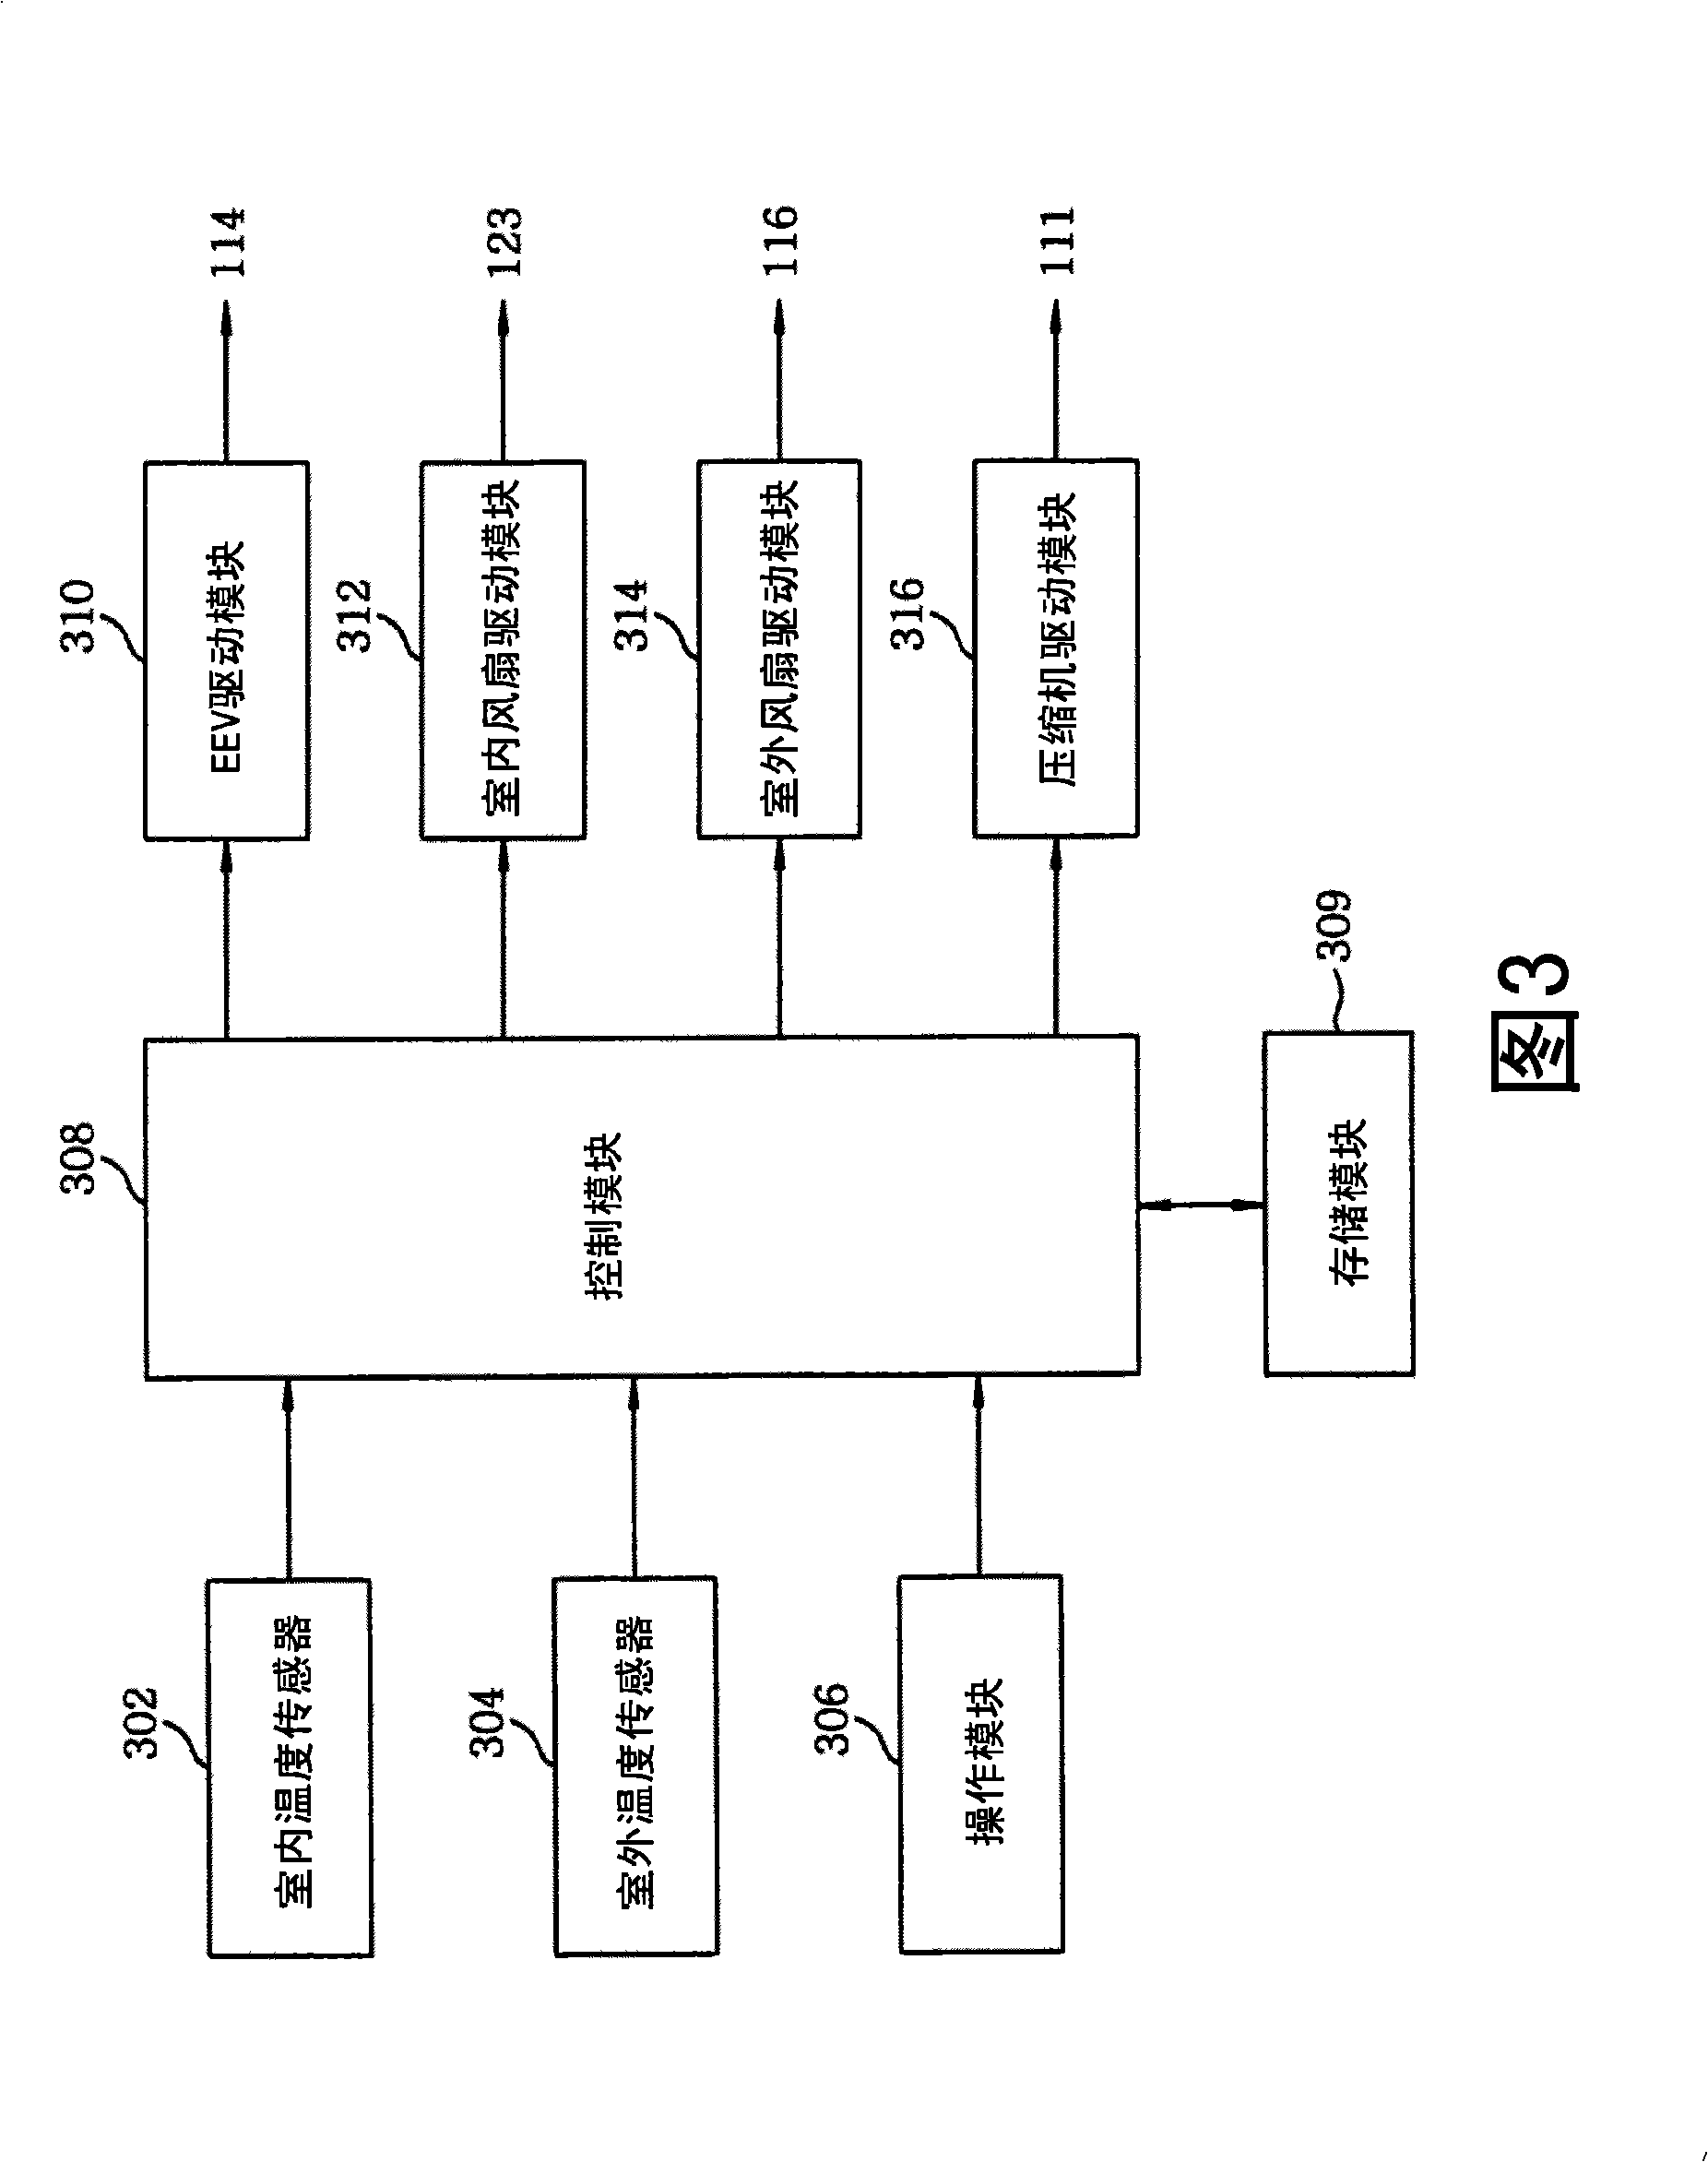 Method for controlling operating of air conditioner